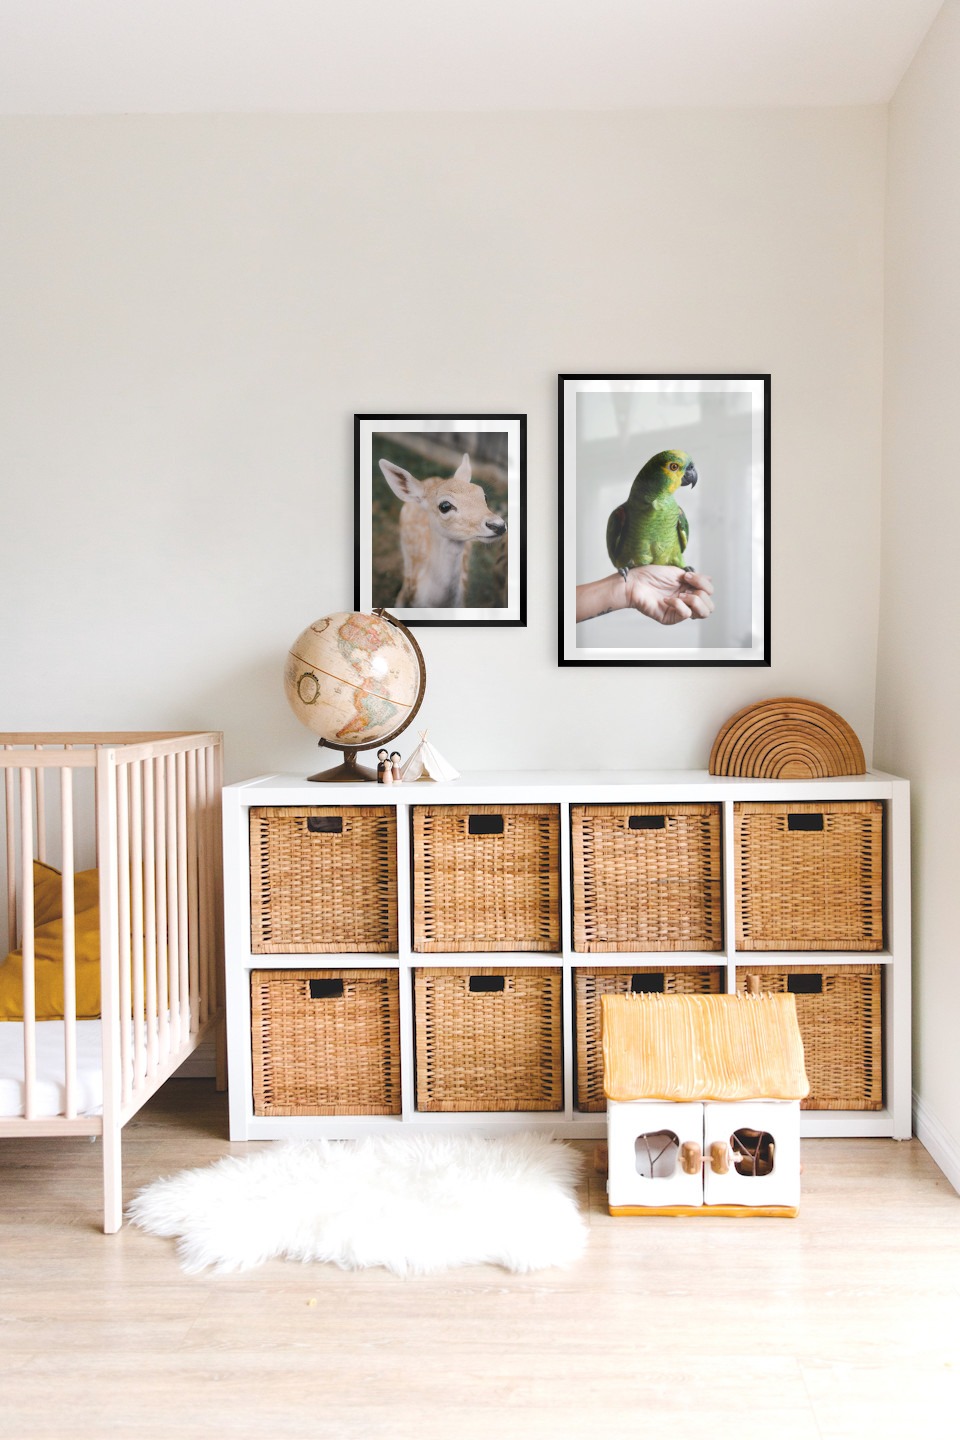 Gallery wall with picture frames in black in sizes 40x50 and 50x70 with prints "Deer" and "Green parrot"